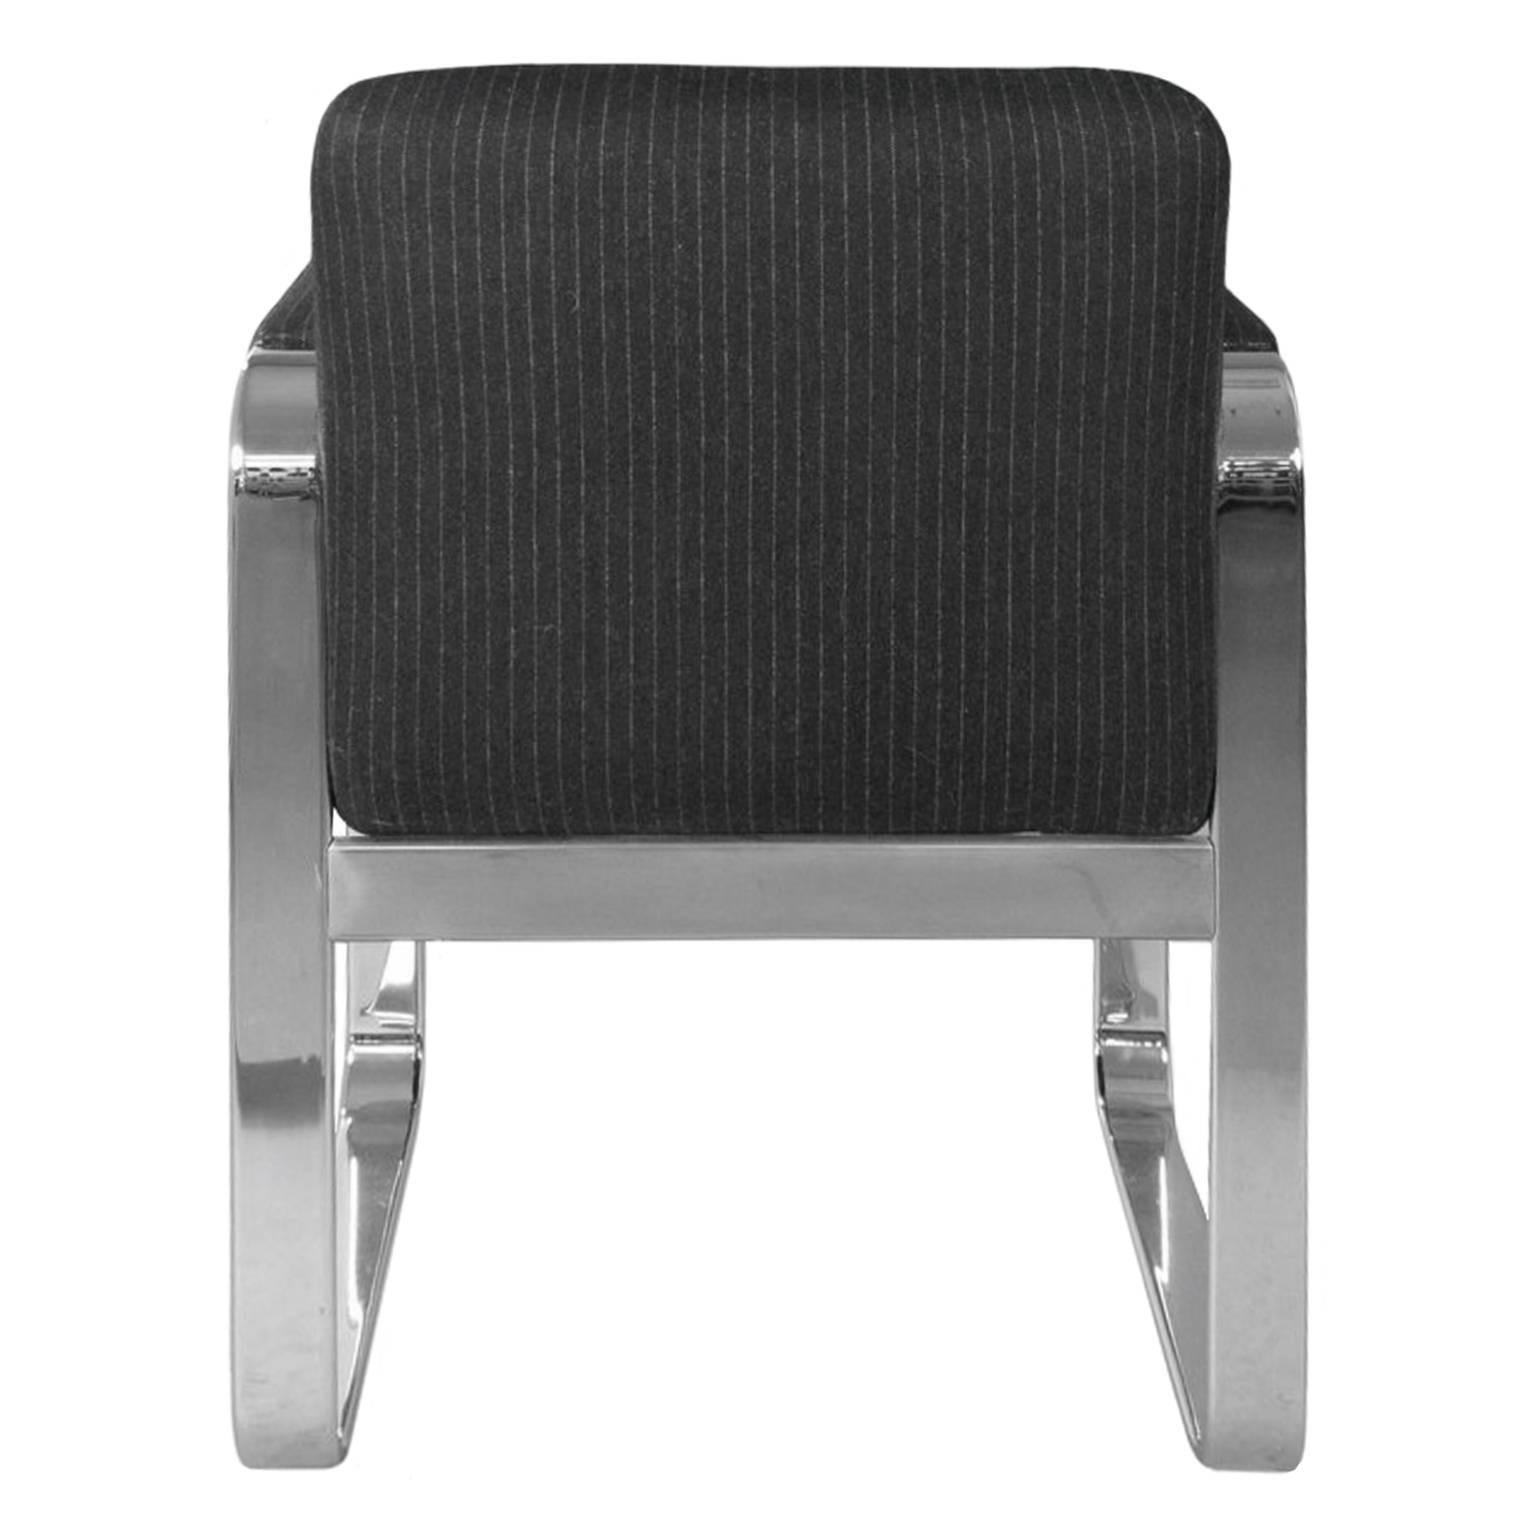 American 1970s Rounded Rectangular Chrome Armchair in Charcoal Pinstripe Upholstery